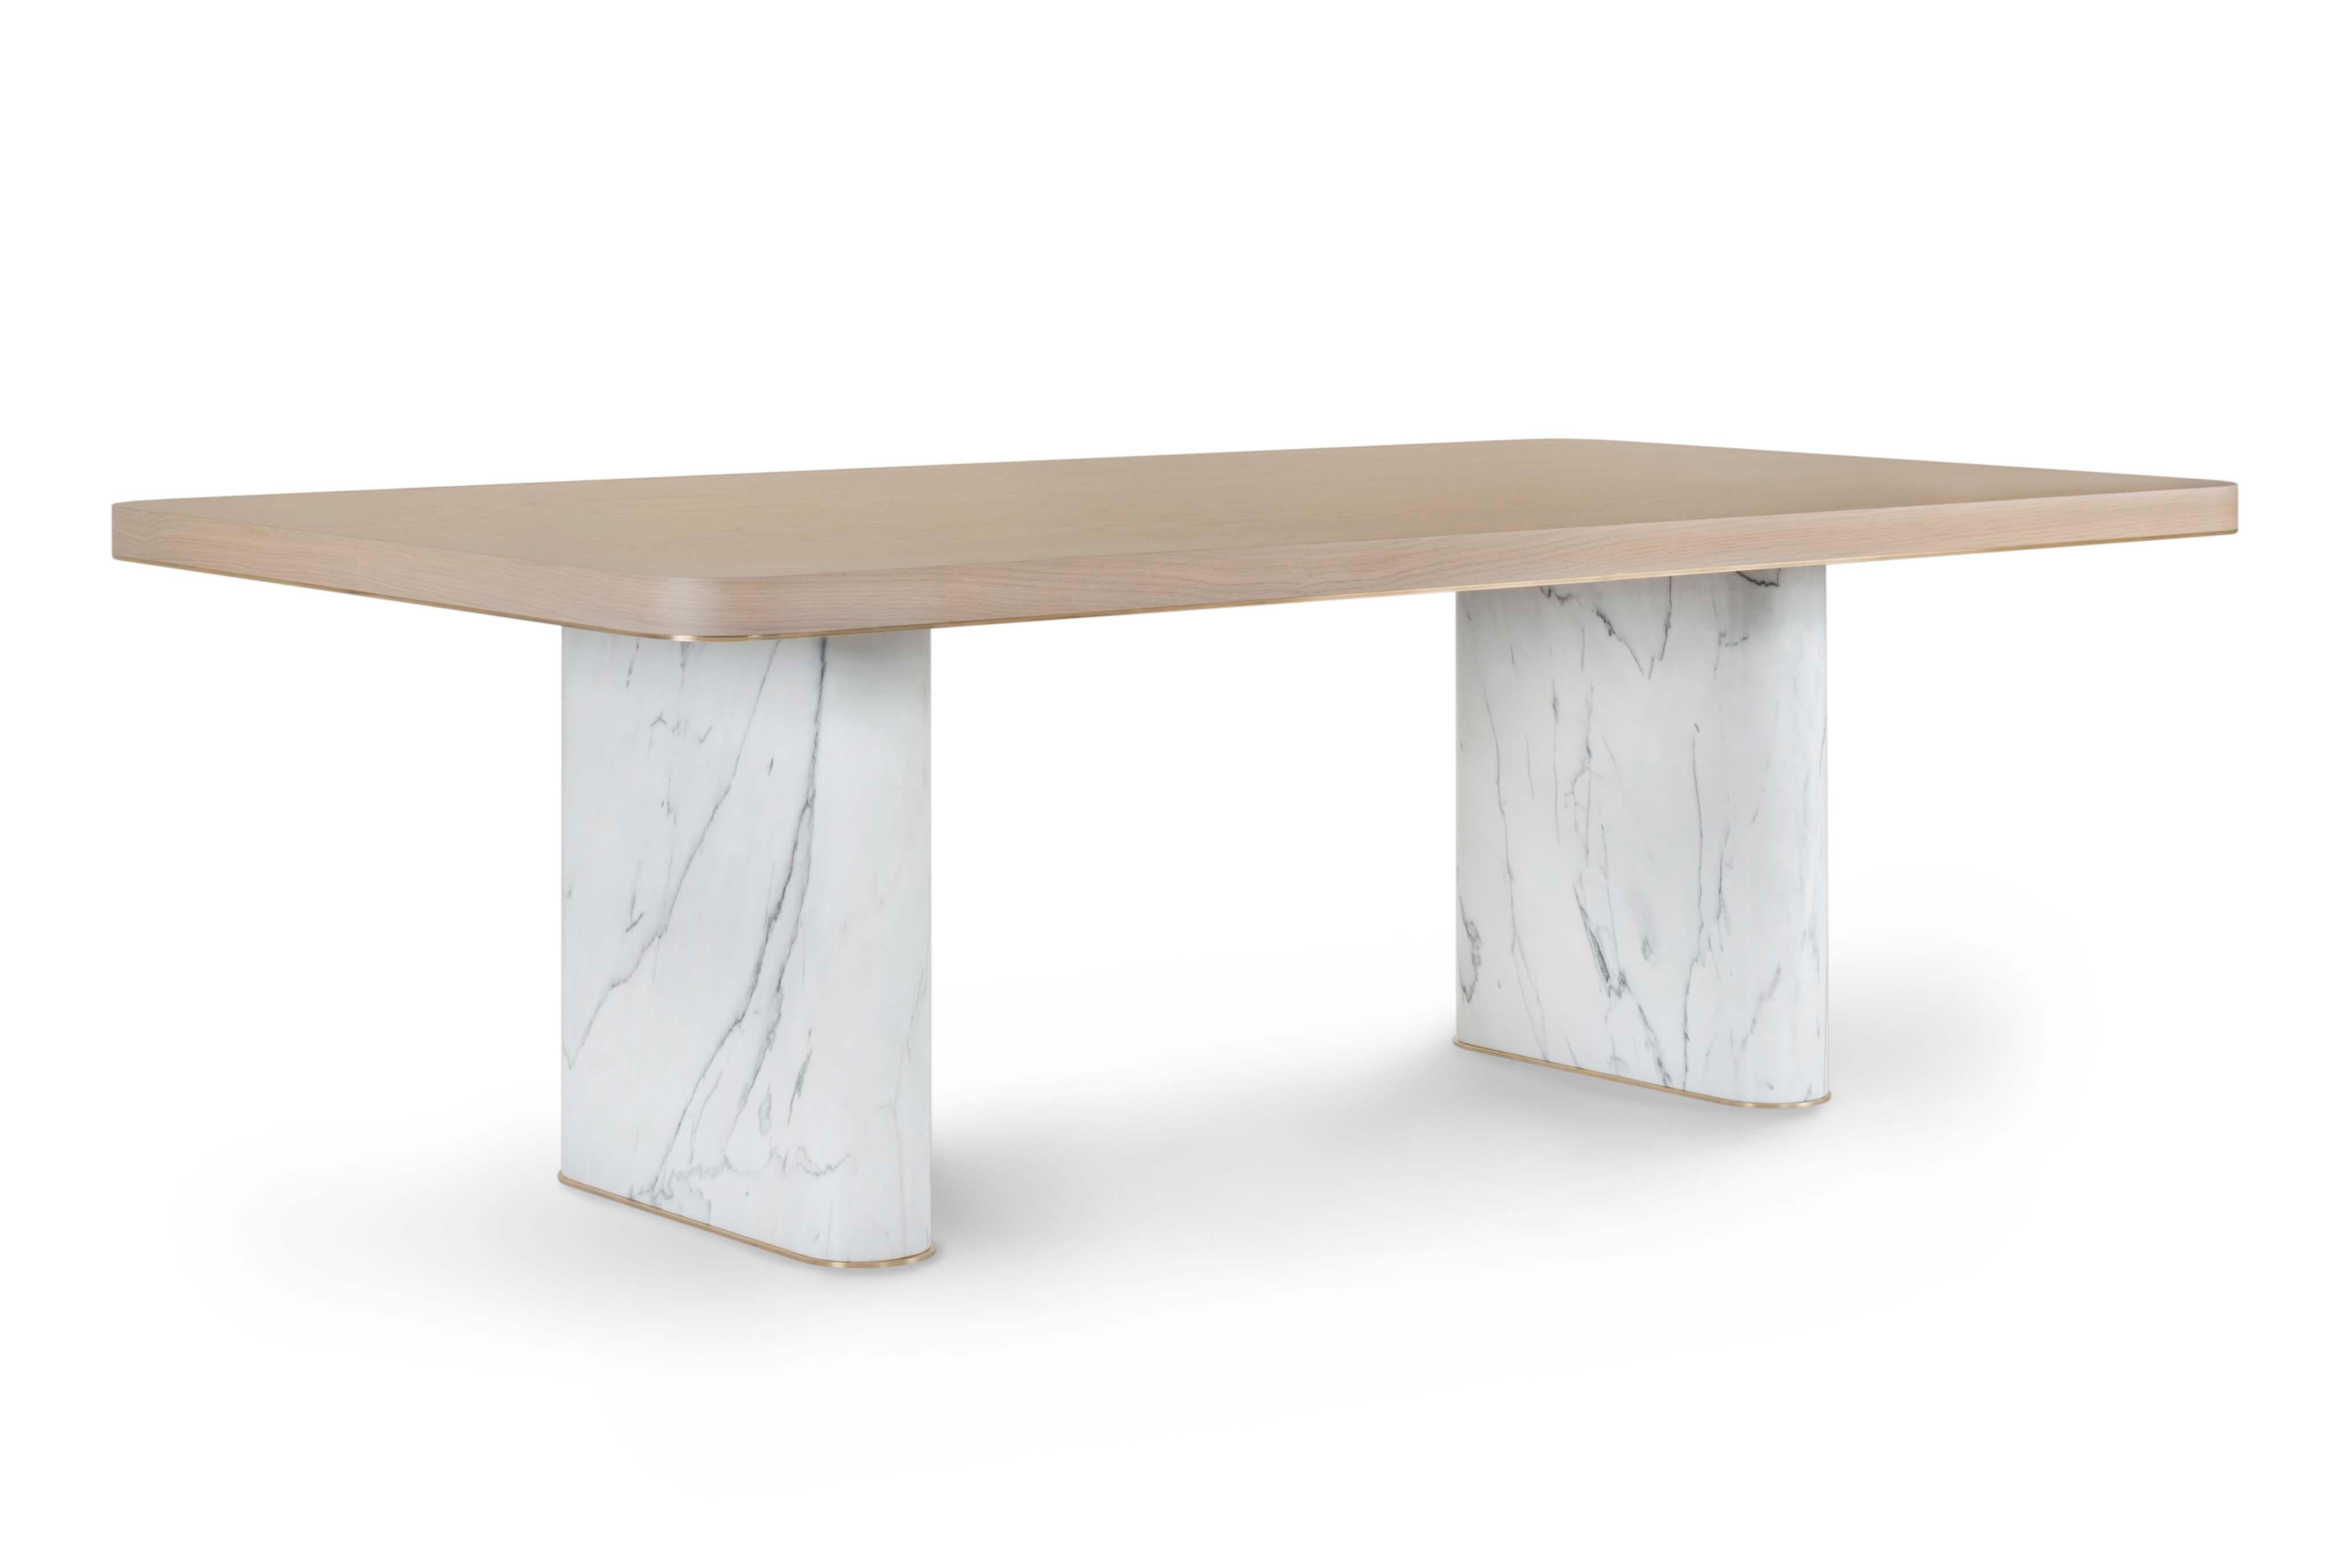 Carrara Marble Modern Fall Dining Table Calacatta Marble Handmade in Portugal by Greenapple For Sale